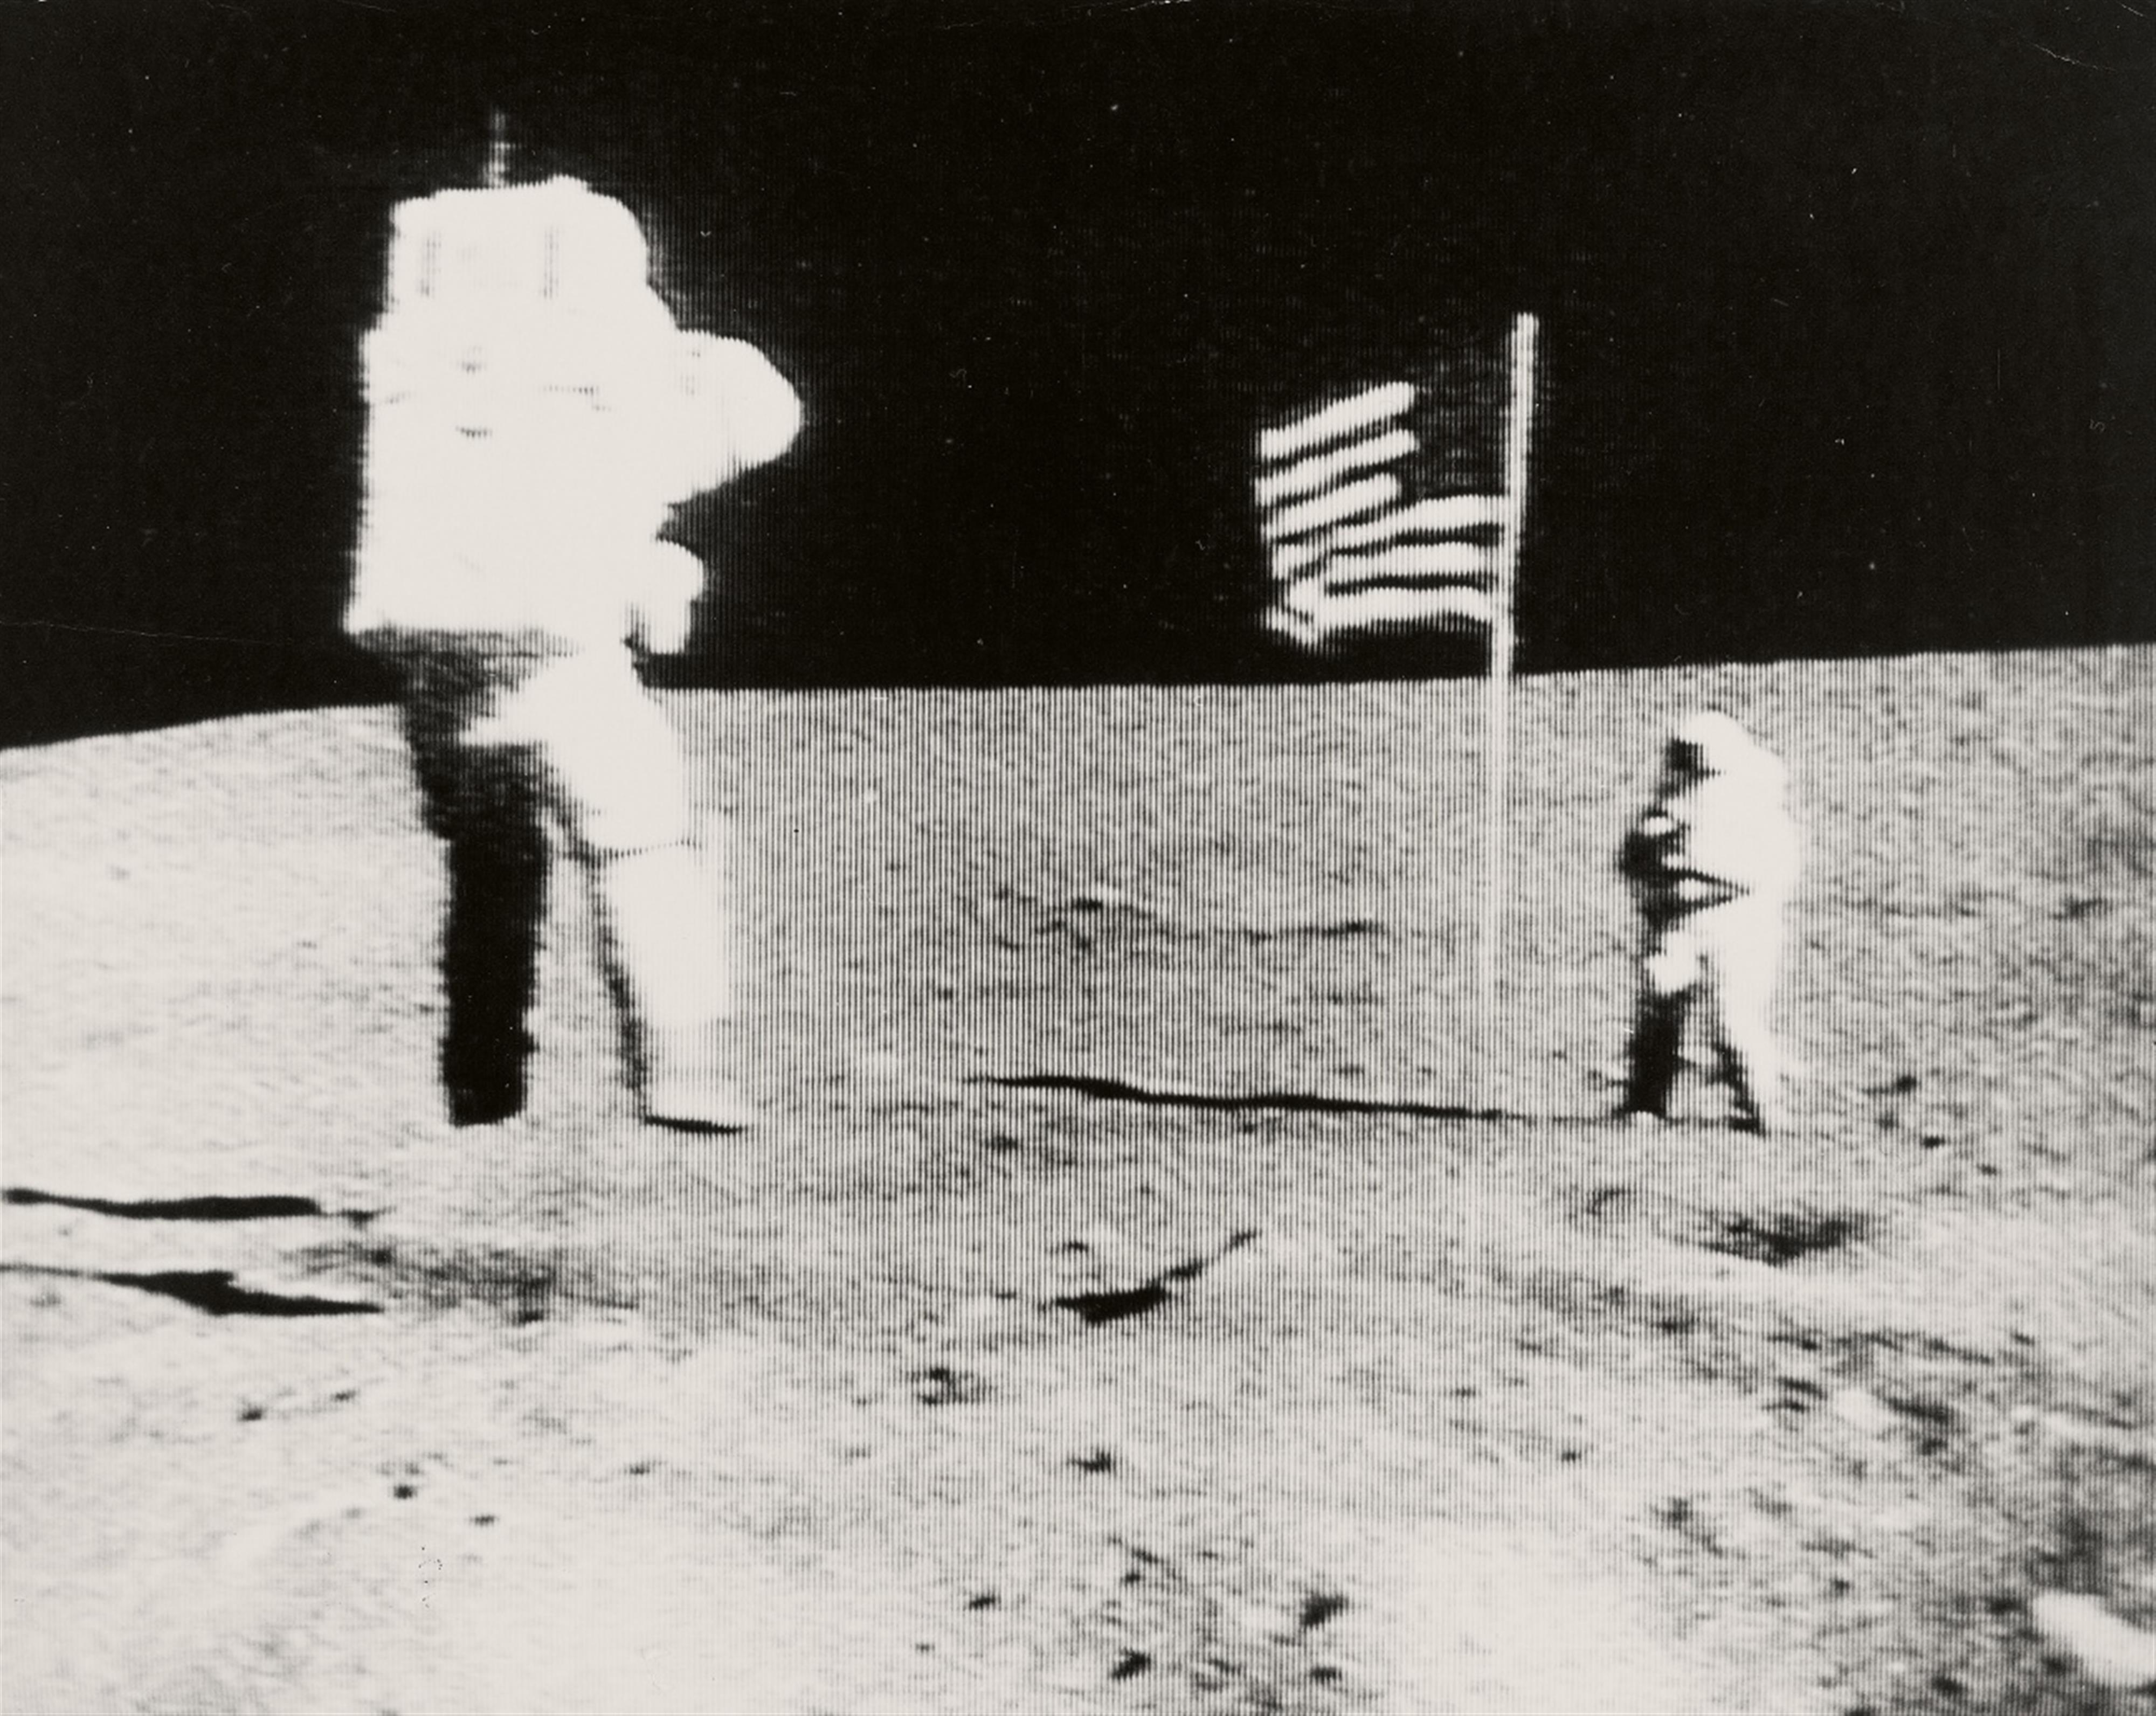 NASA - Apollo 16 TV Picture - Astronaut John W. Young leaps from the lunar surface as he salutes the U.S. flag - image-1